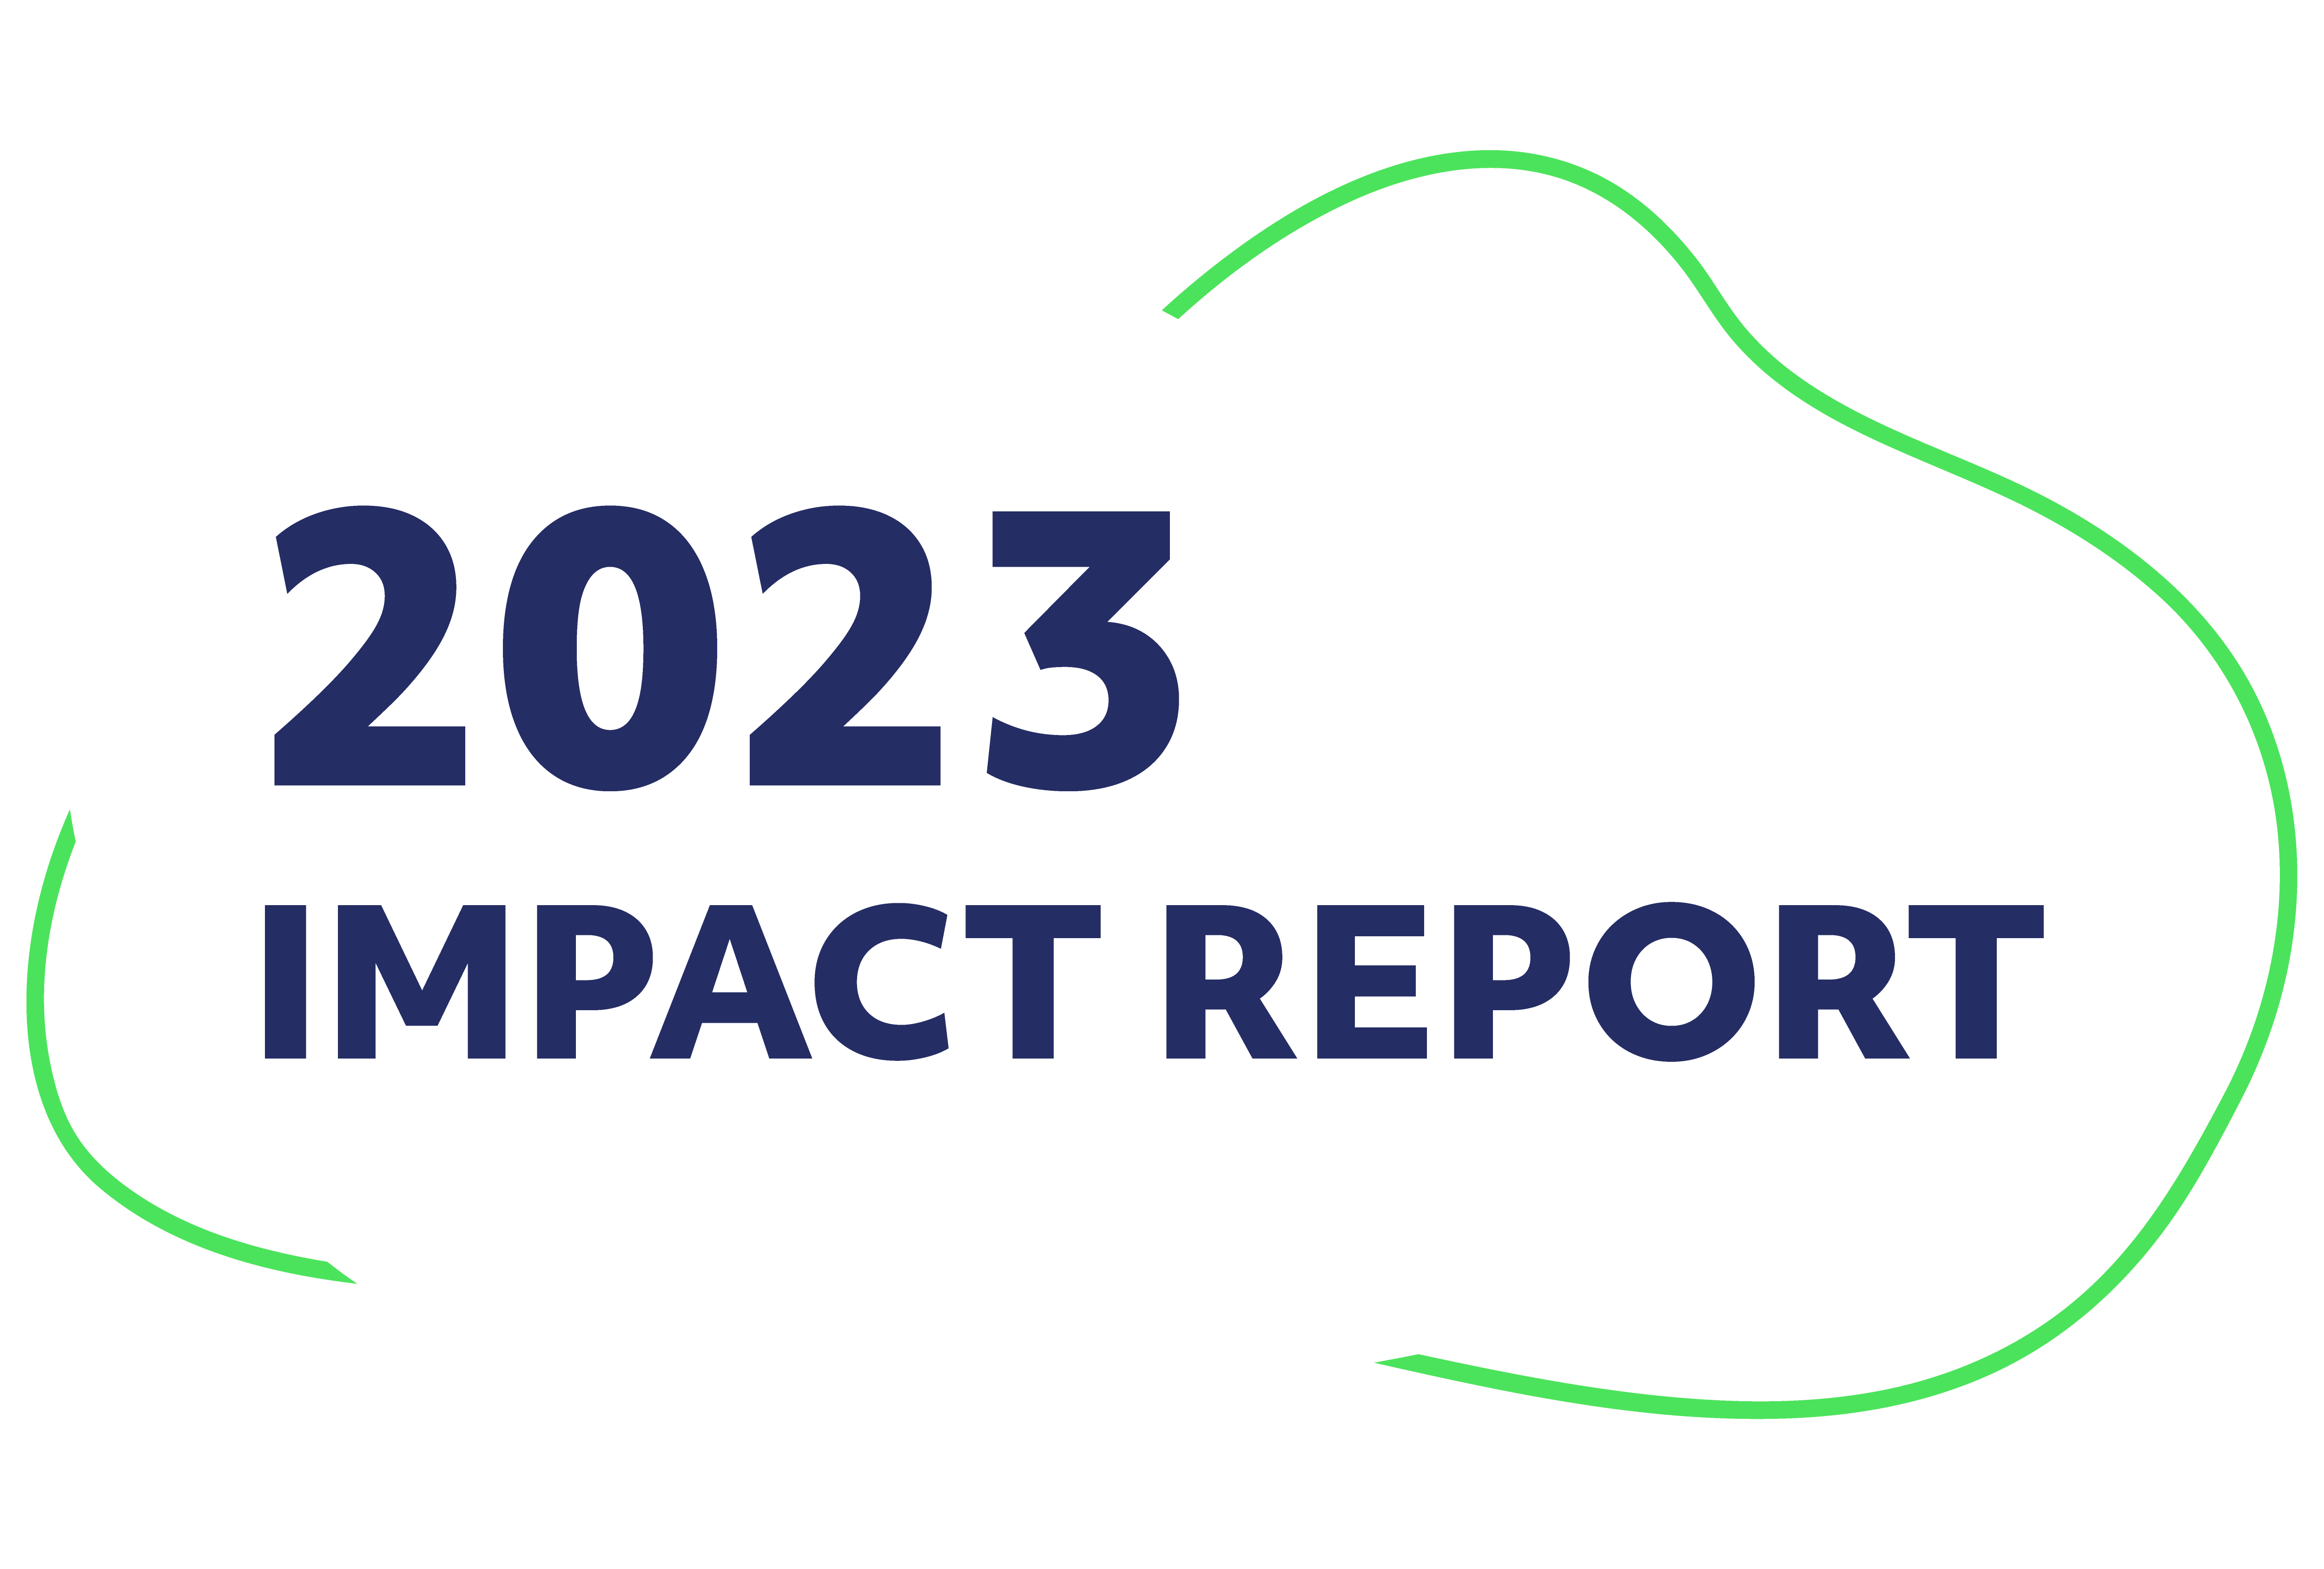 2023 Impact Report in organic shape with outlines.